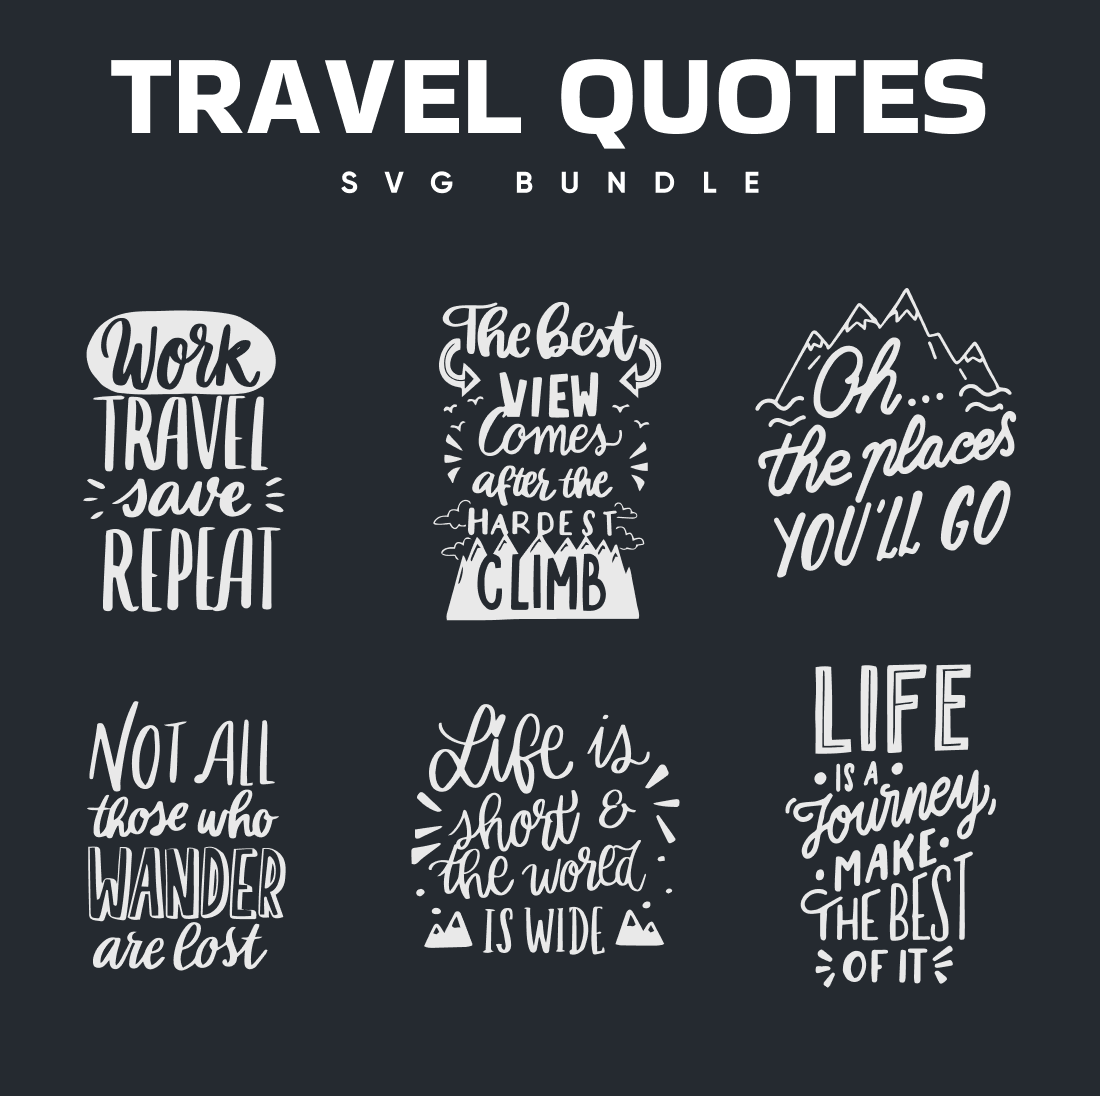 Travel Quotes SVG.